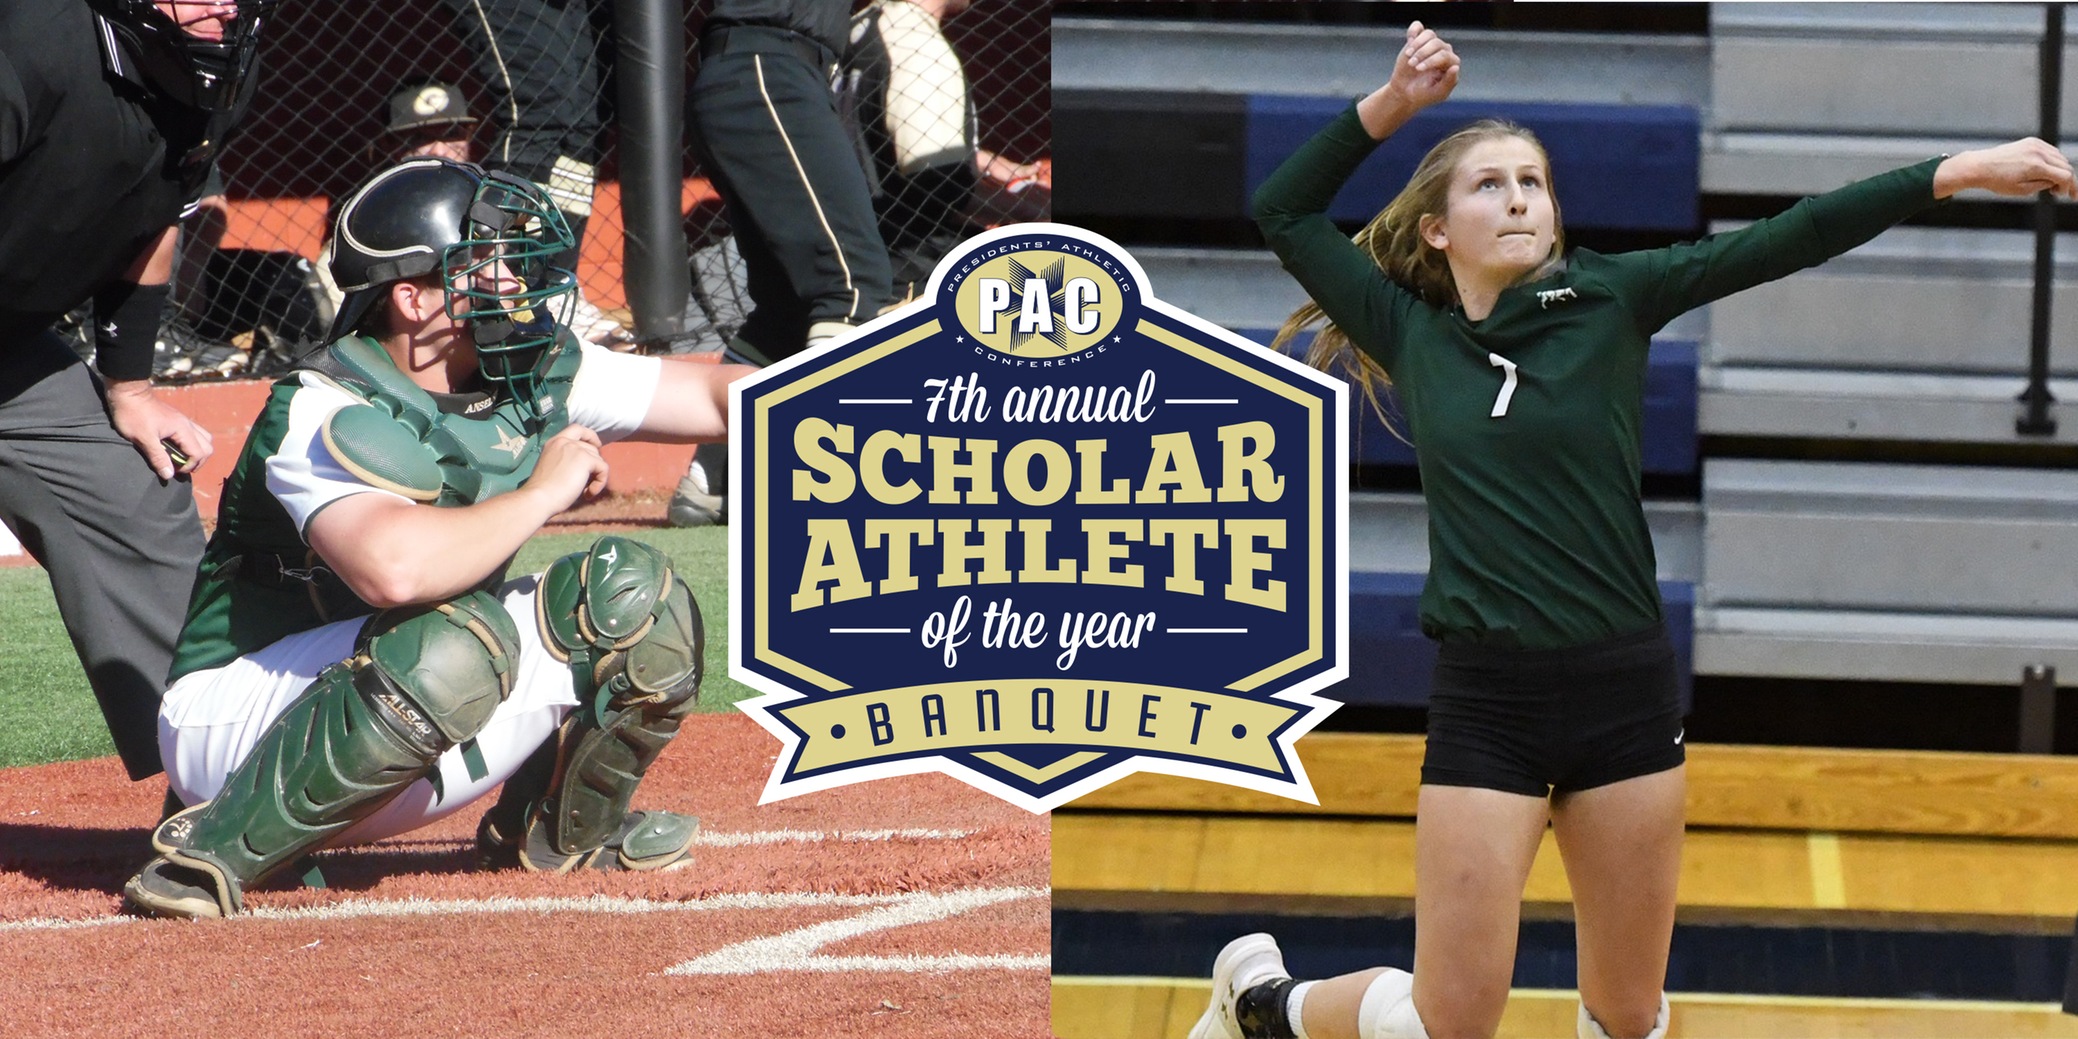 Anselmino and Sparks Recognized as PAC Scholar-Athletes